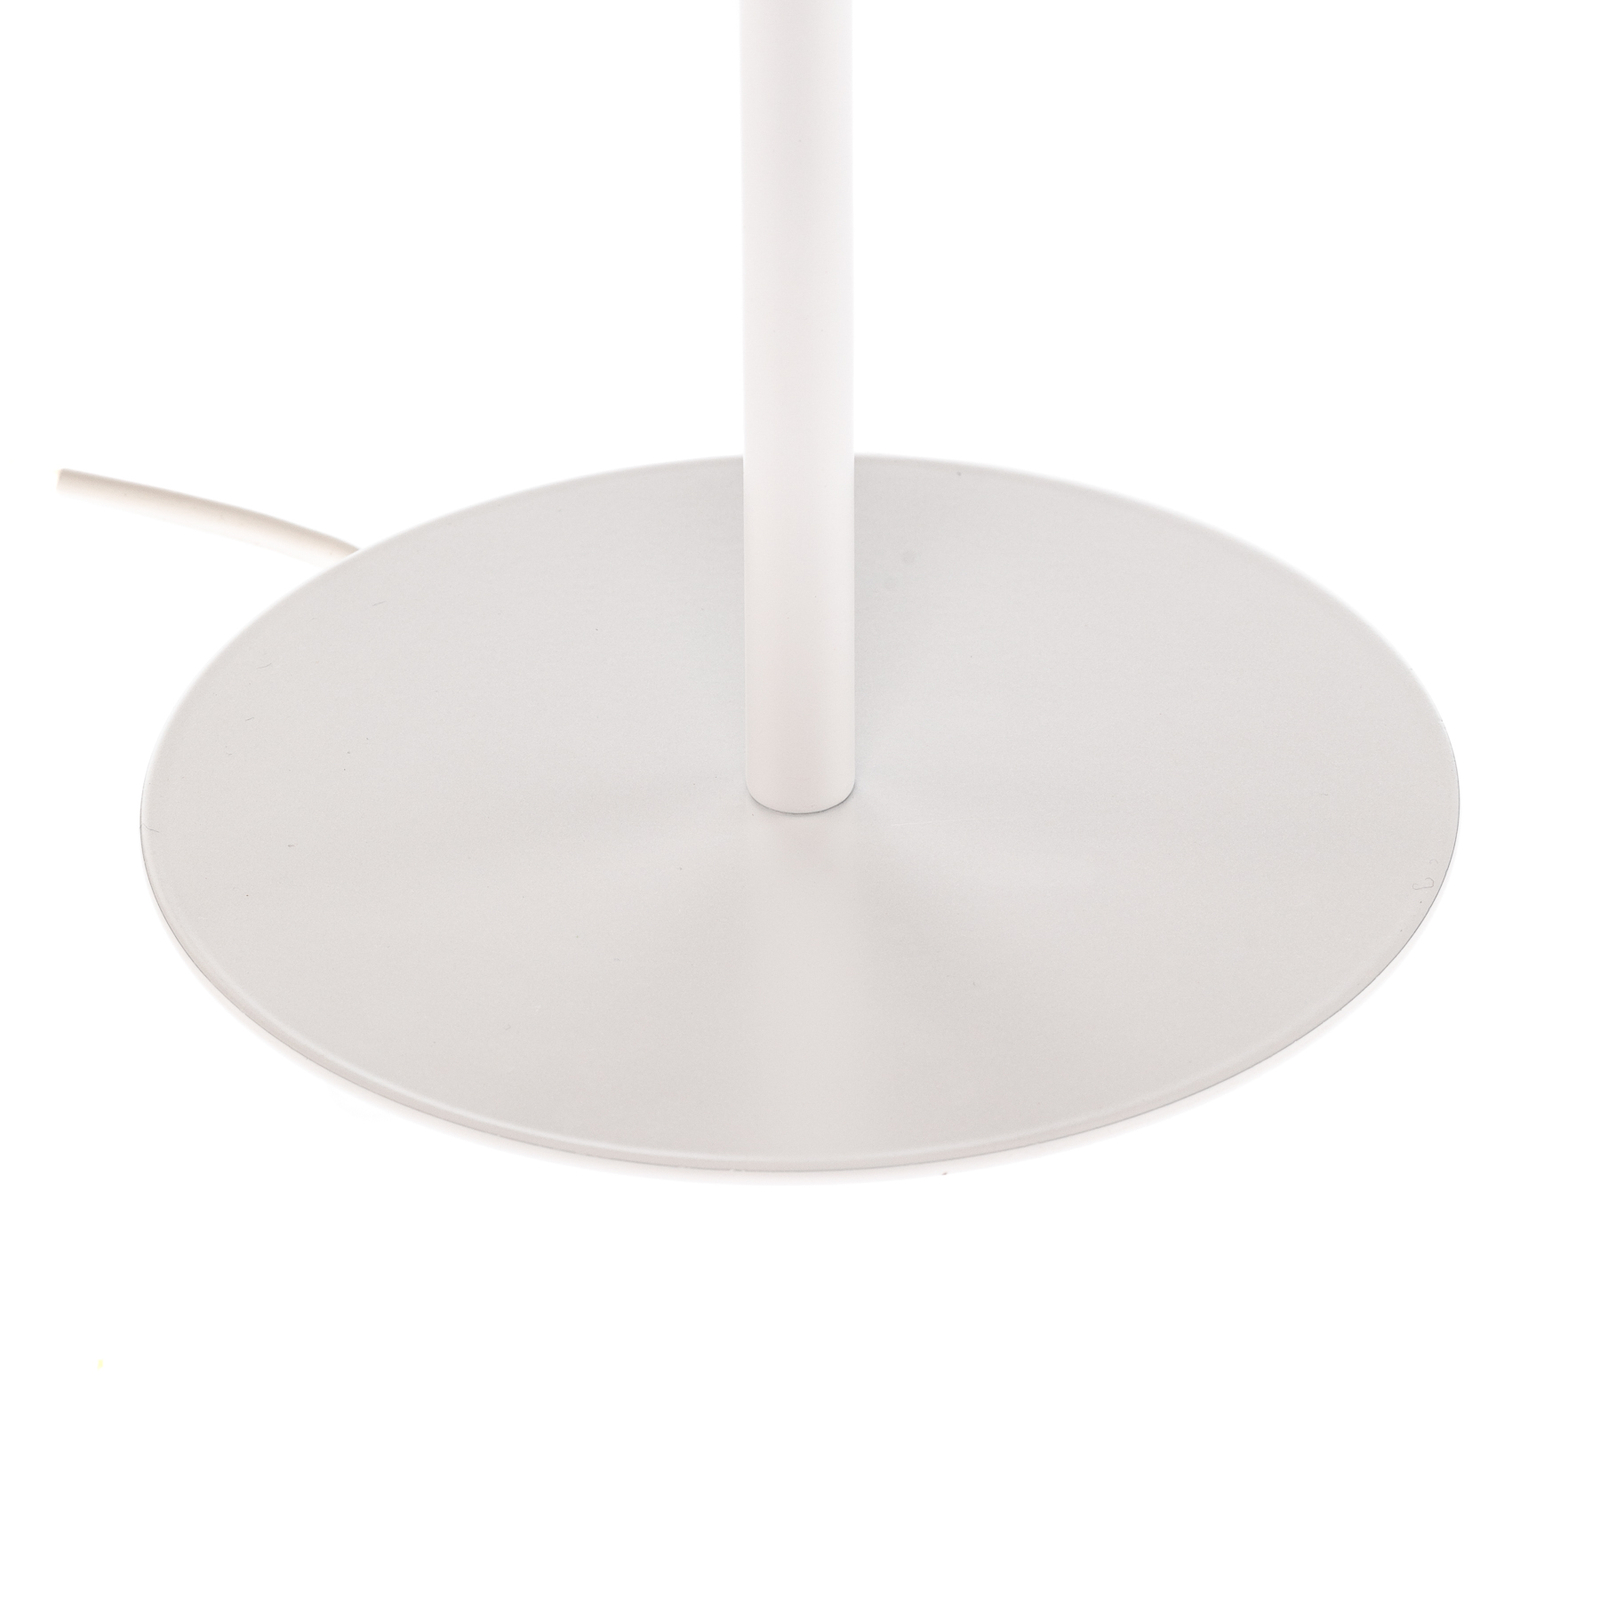 Soho table lamp, conical height 33 cm, white